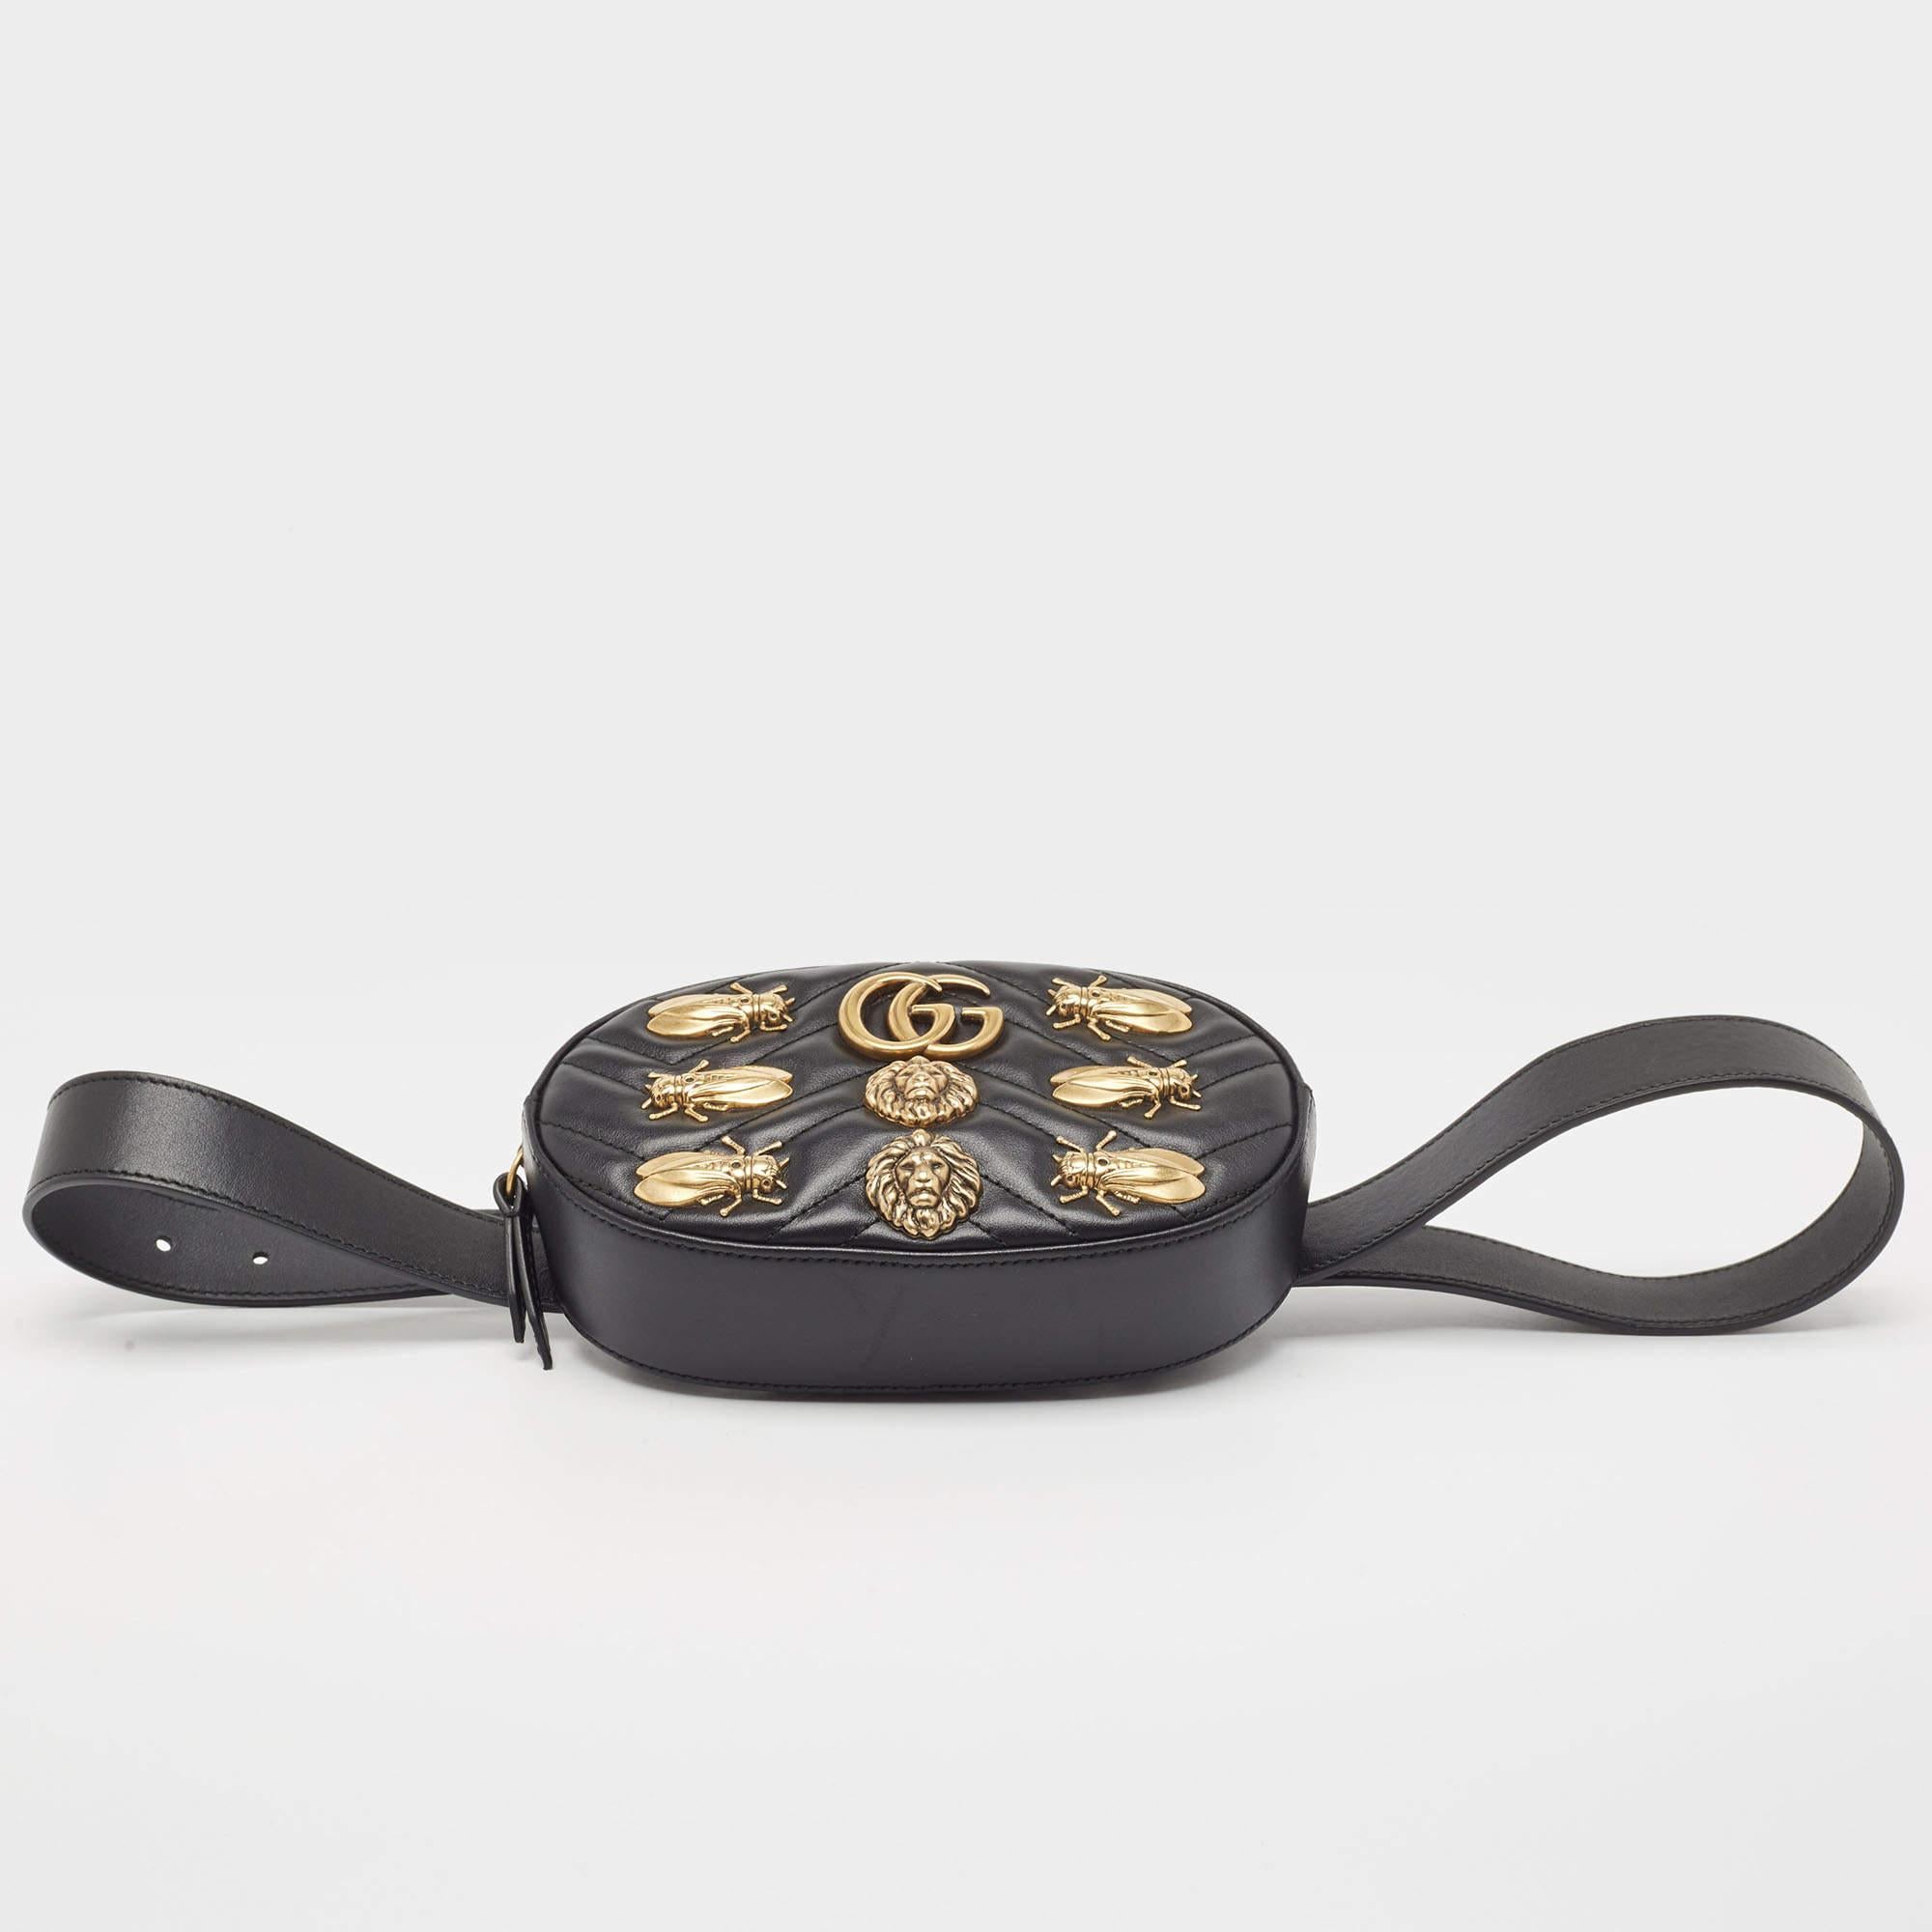 This Gucci bag here is crafted in matelassé leather and is equipped with a zipper fastening that opens to a well-sized Alcantara interior. On the front, there is a GG logo amidst animal studs, and an adjustable belt is provided for you to wear